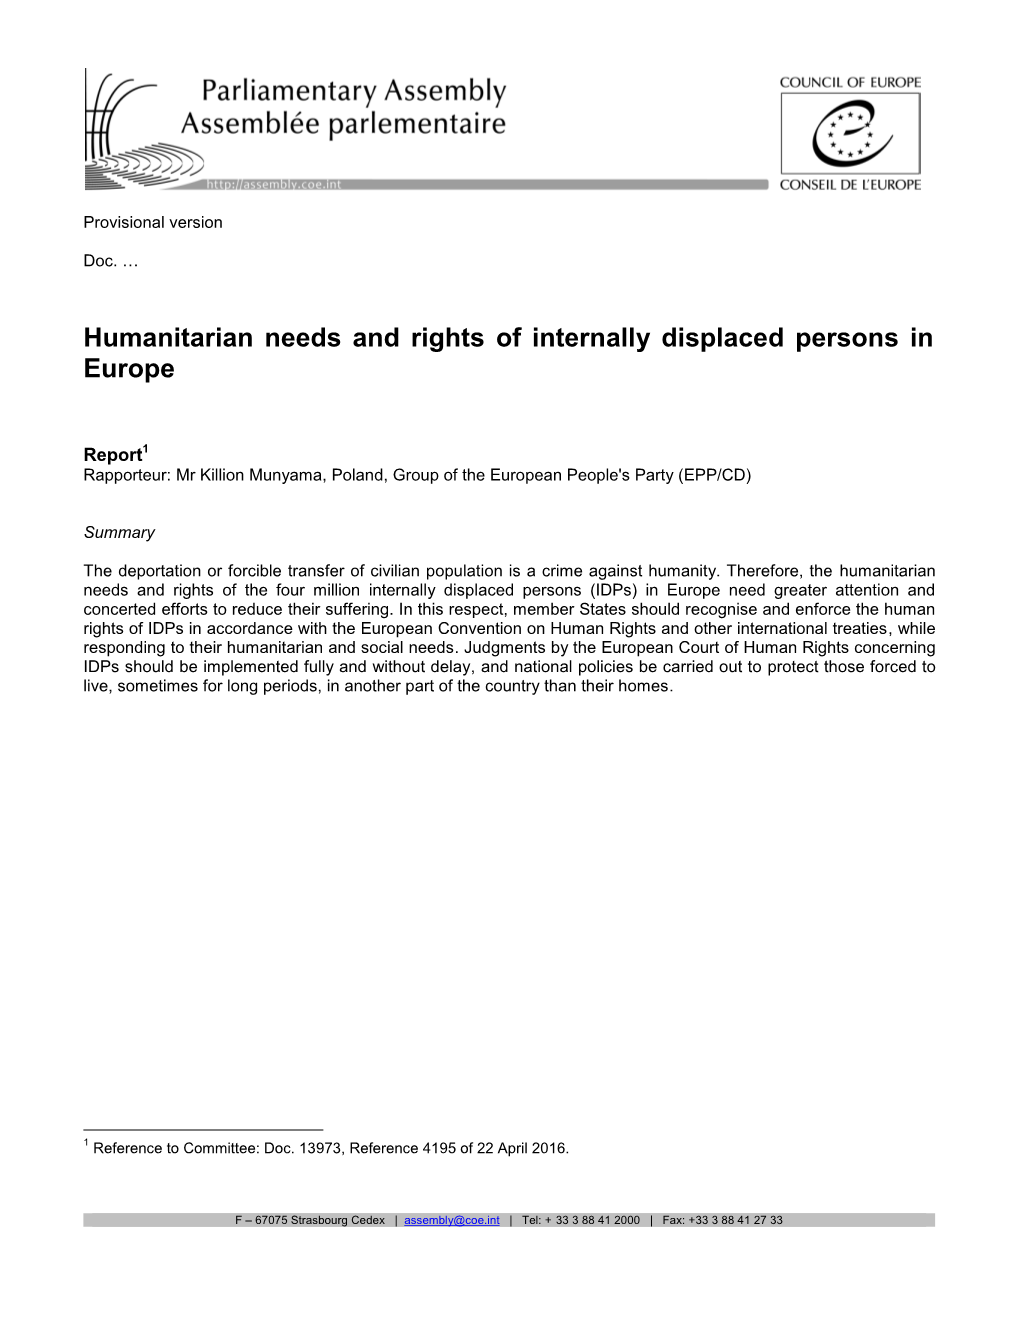 Humanitarian Needs and Rights of Internally Displaced Persons in Europe